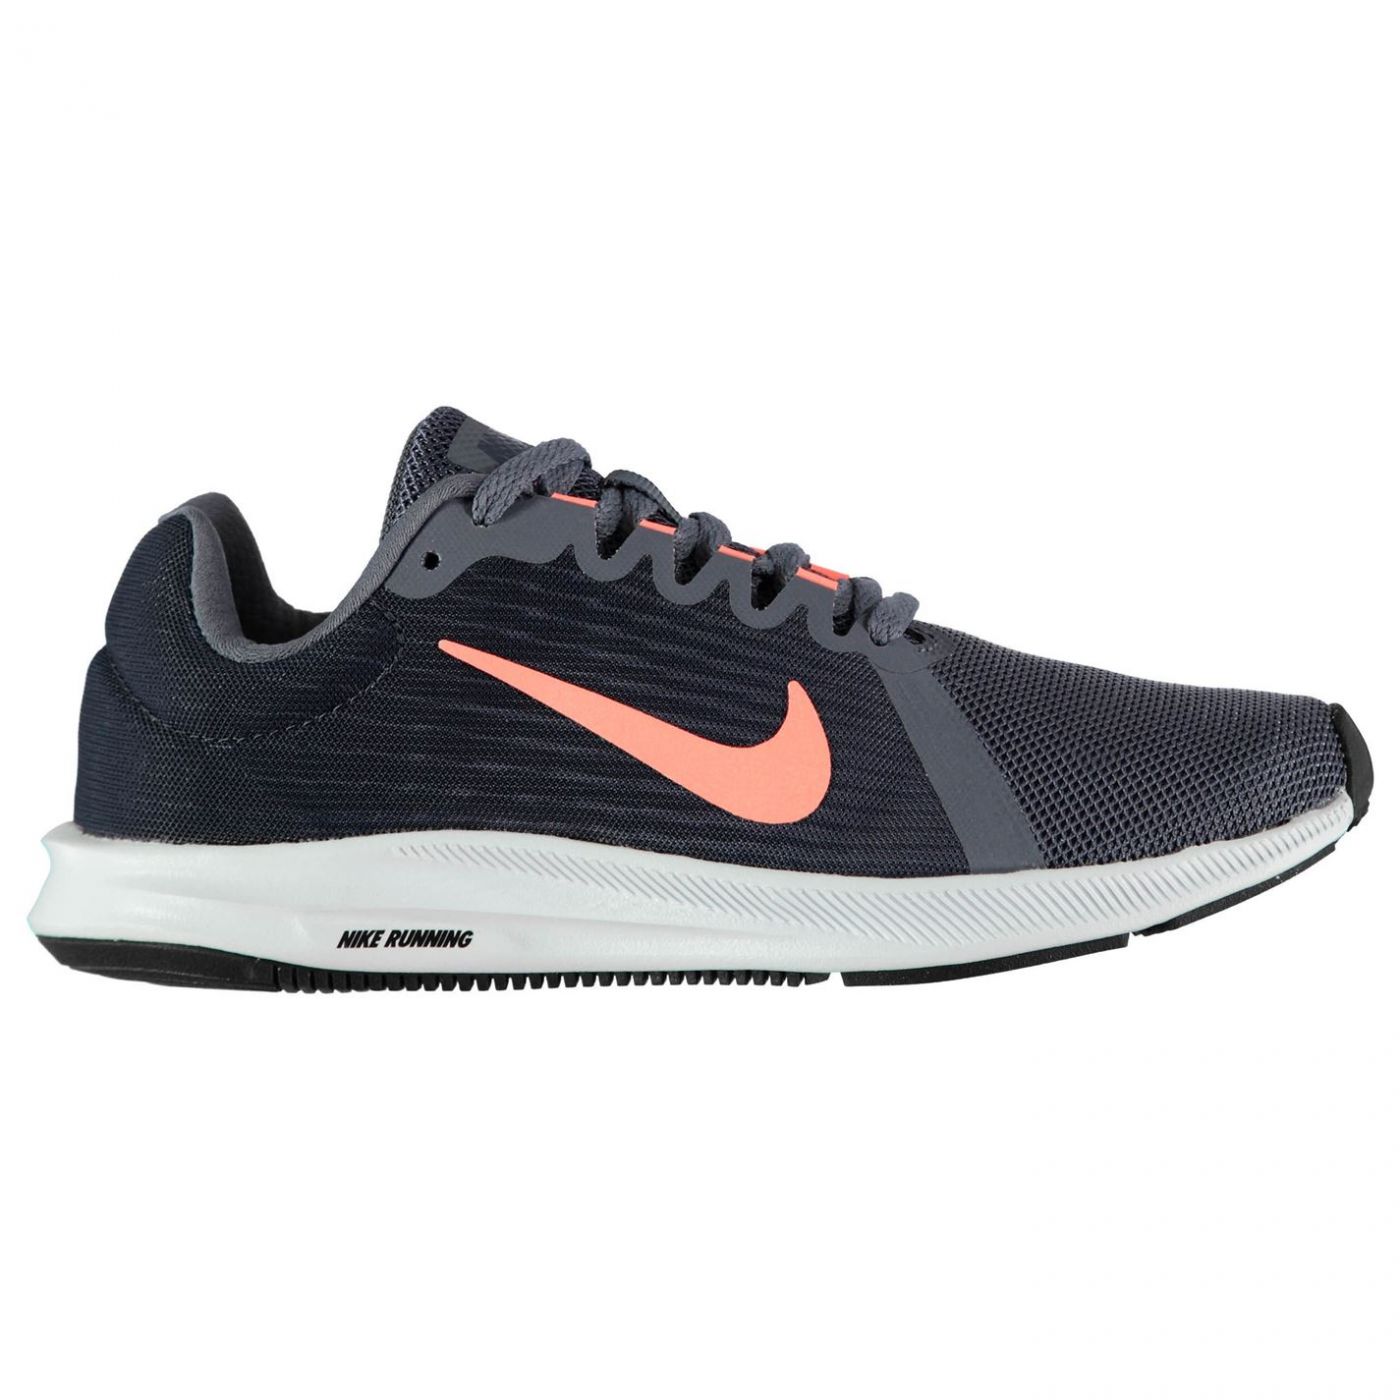 Nike Downshifter 8 Ladies Trainers